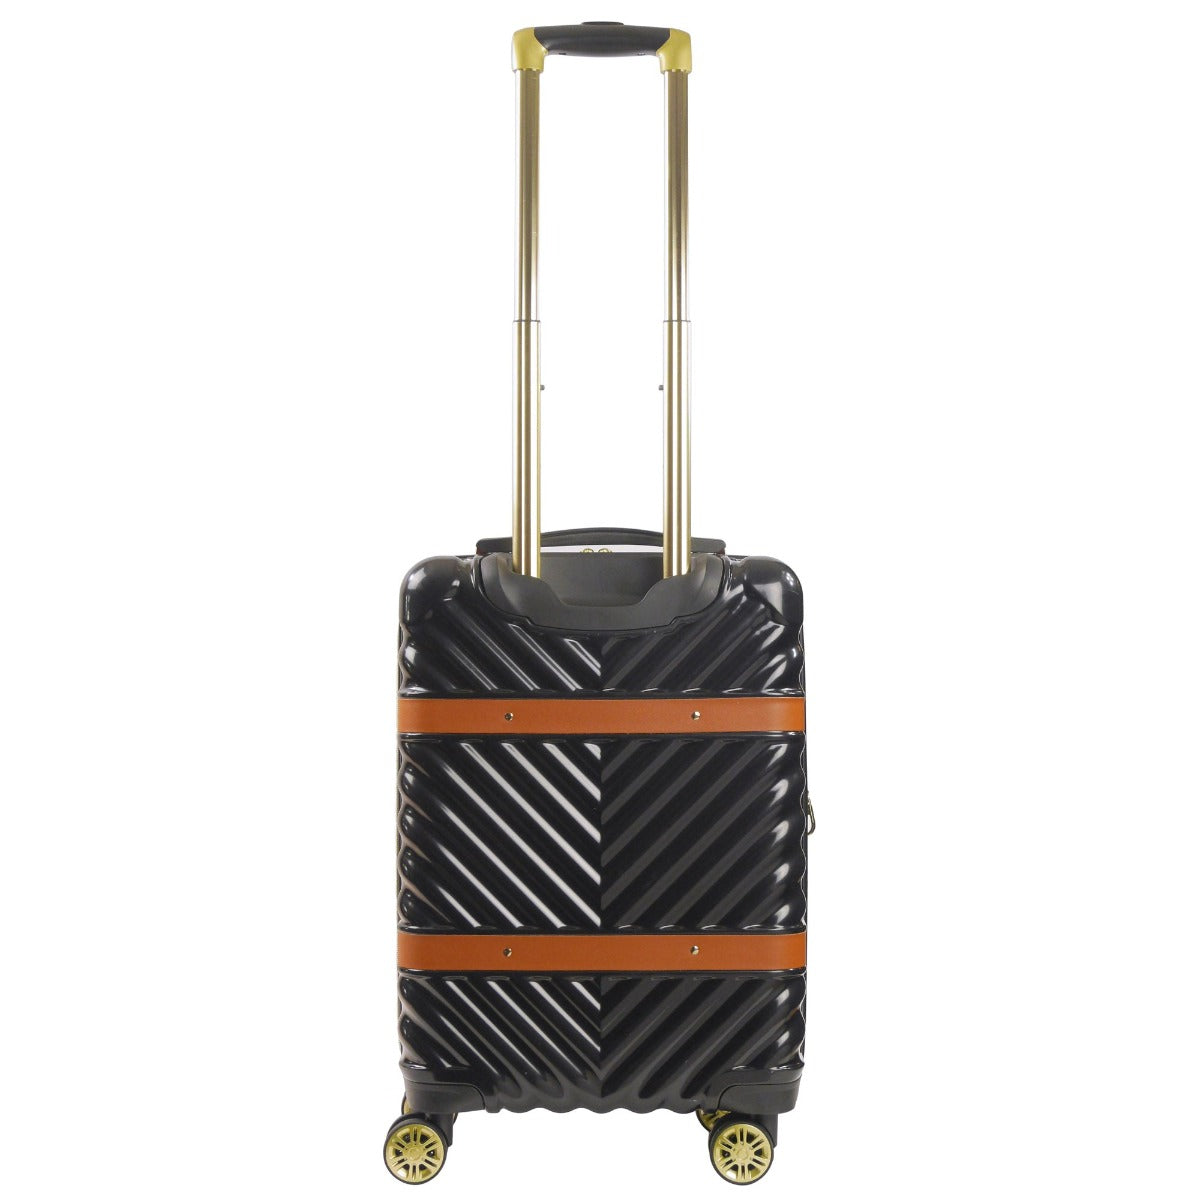 Christian Siriano New York Stella 22 inch hardside spinner suitcase black - best carry on luggage for travelling